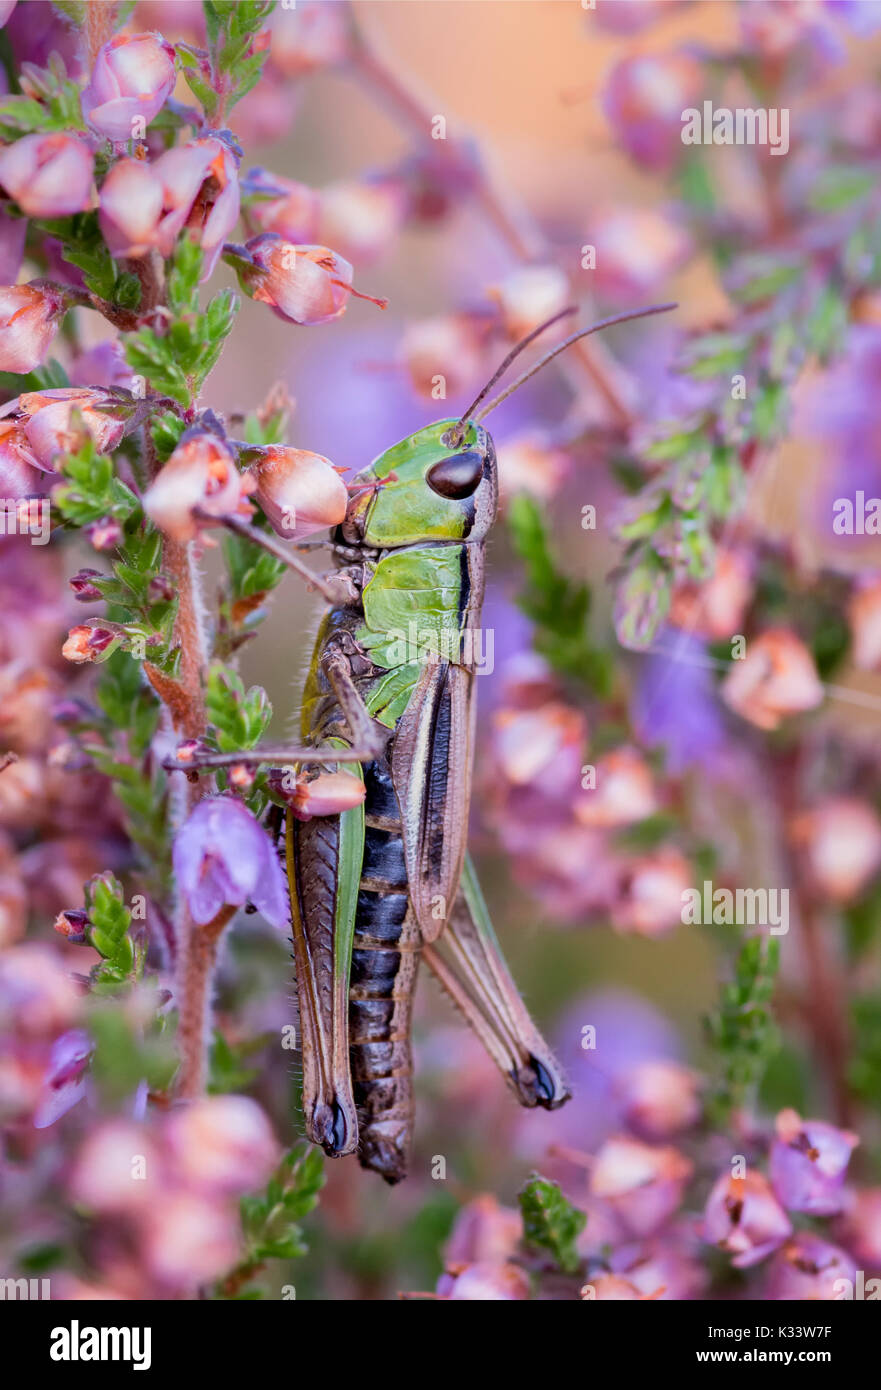 Meadow Grasshopper resting on Heather Stock Photo